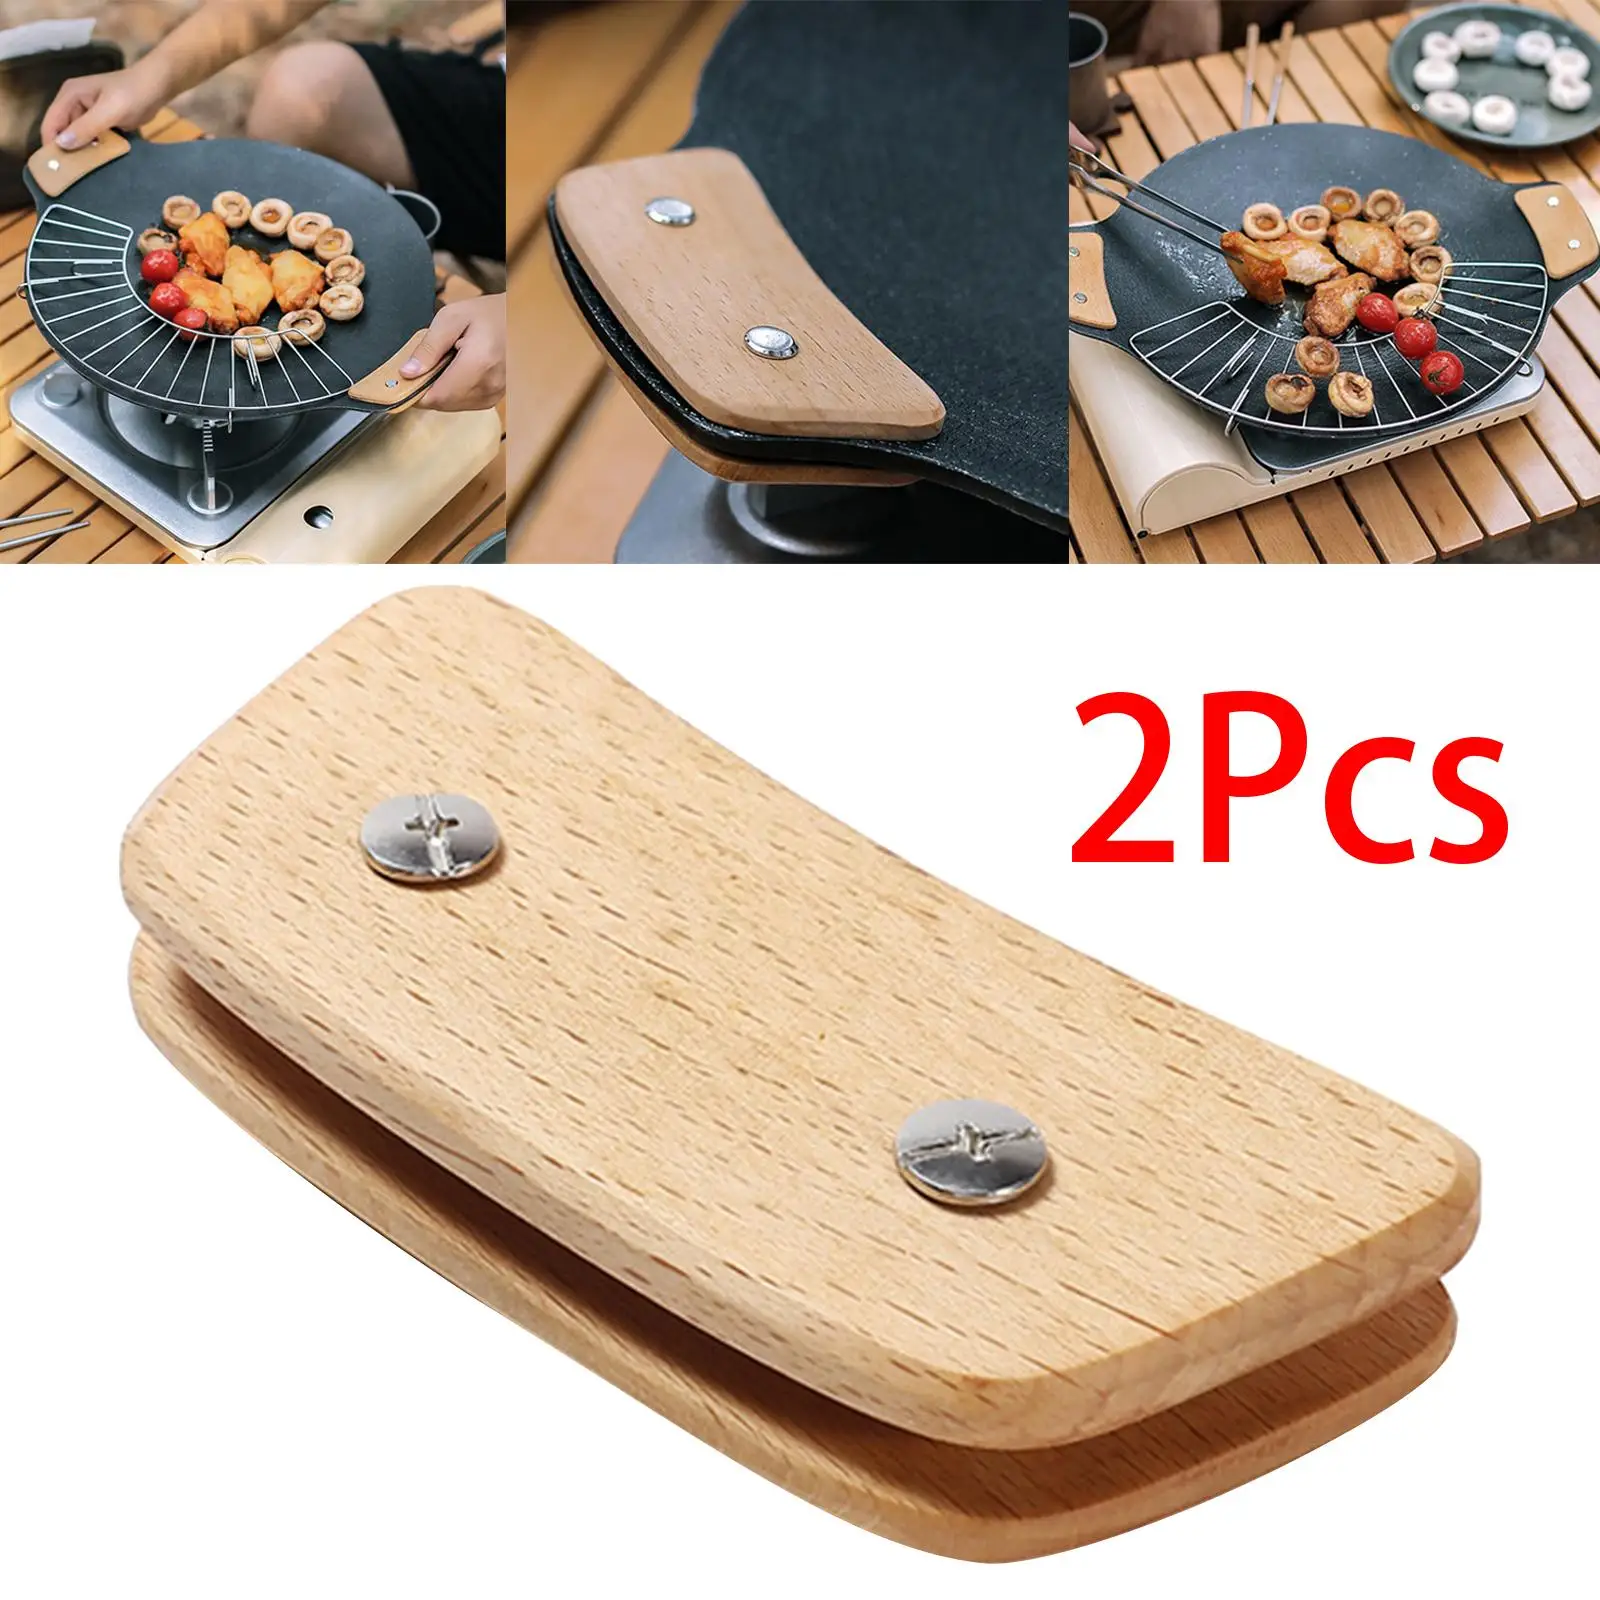 Wooden BBQ Pan Handle Scald Proof Heat Resistant Replacement Insulated for